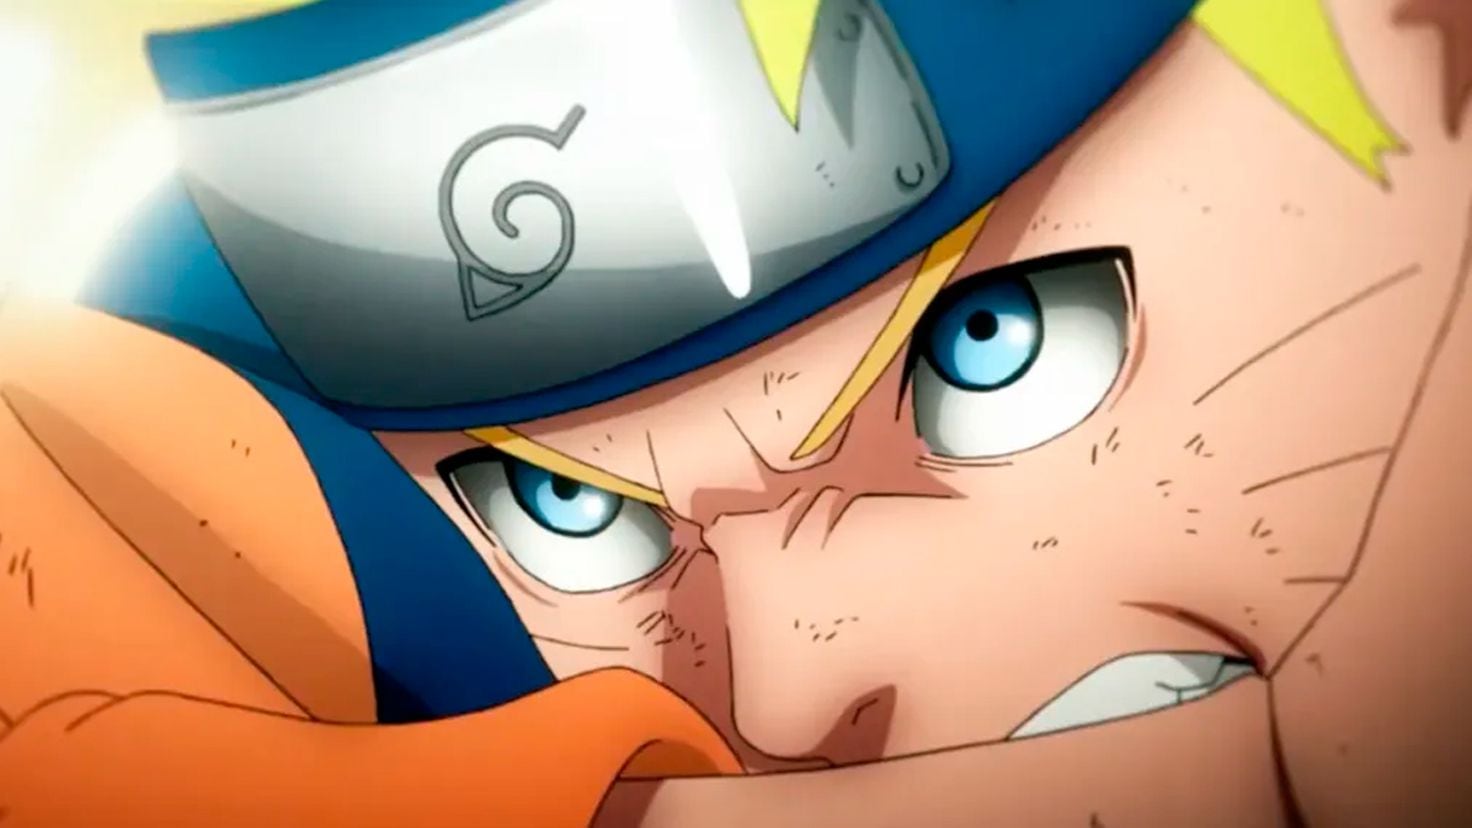 Naruto 20th Anniversary 4-episode anime to be delayed to “increase quality”  - Meristation